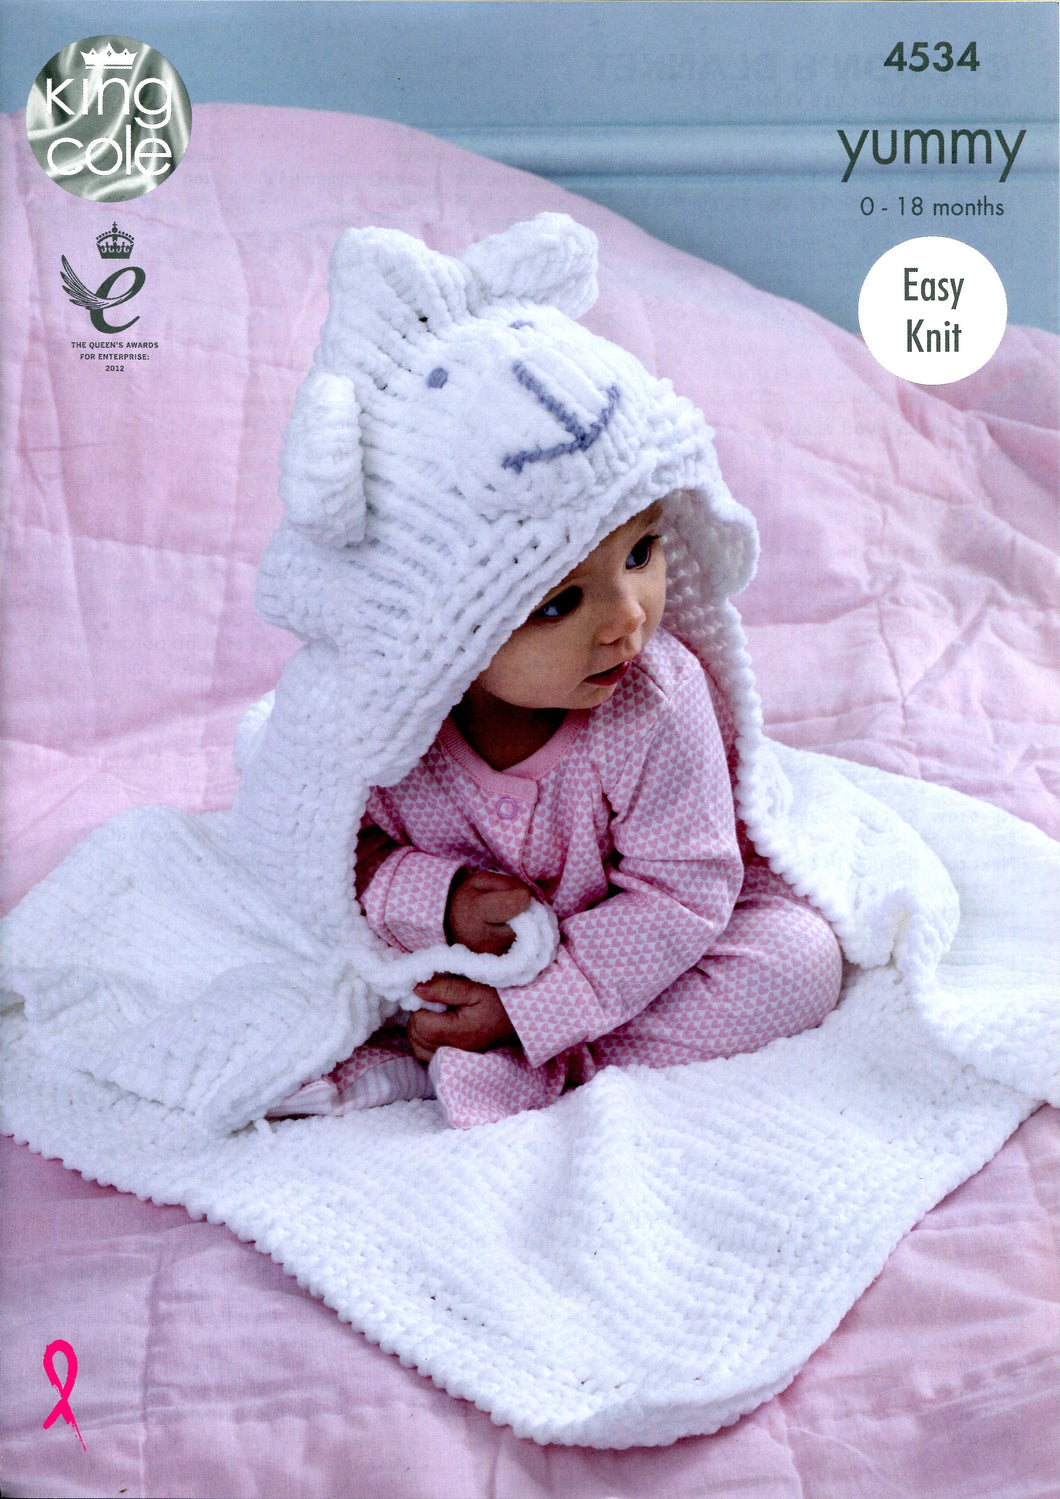 King Cole YUMMY KNITTING PATTERNS - 4534 Cocoon and Blanket